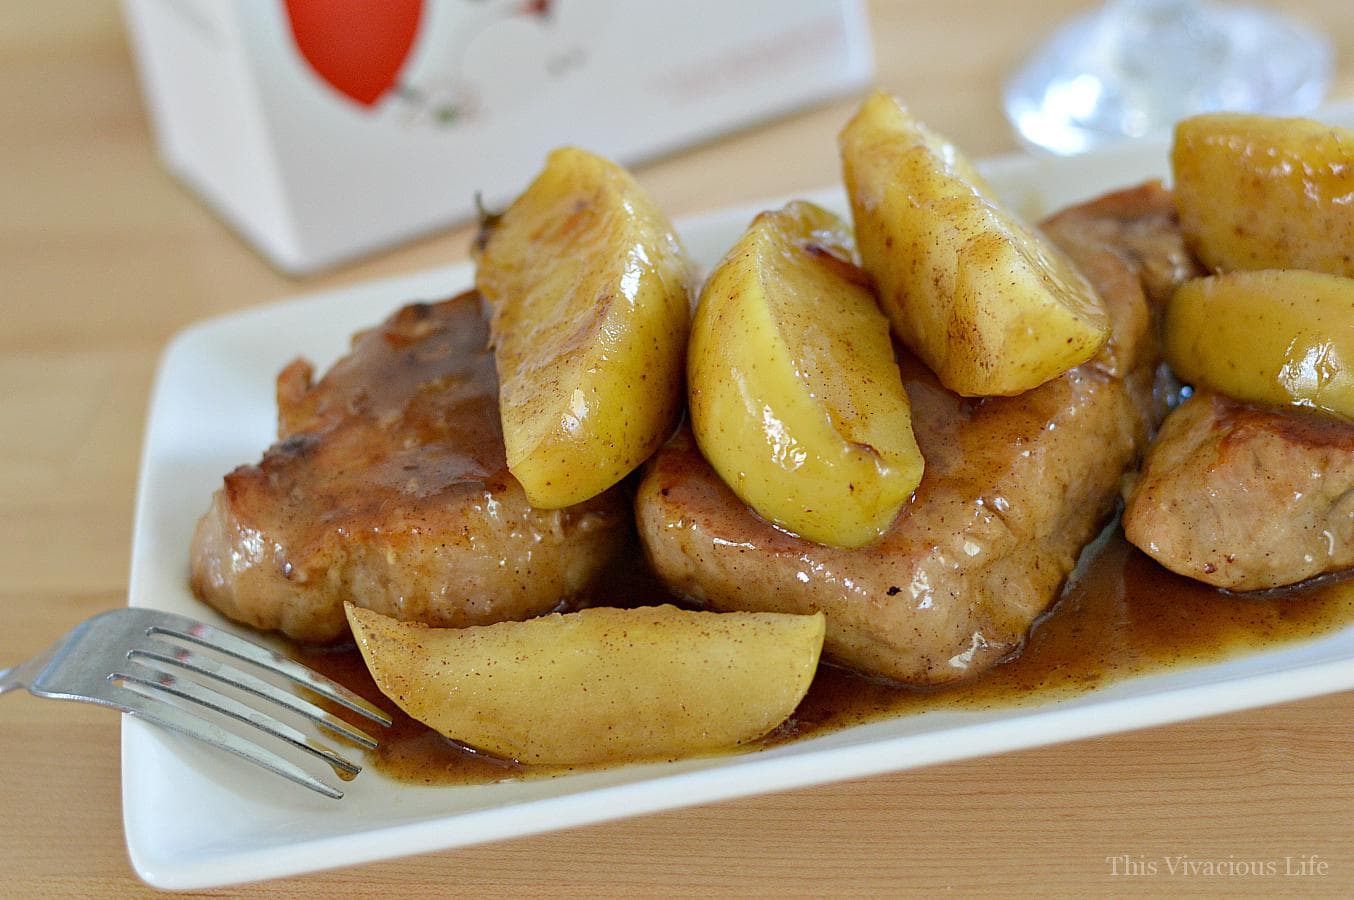 Pork chops and cinnamon apples on a white plate with a fork